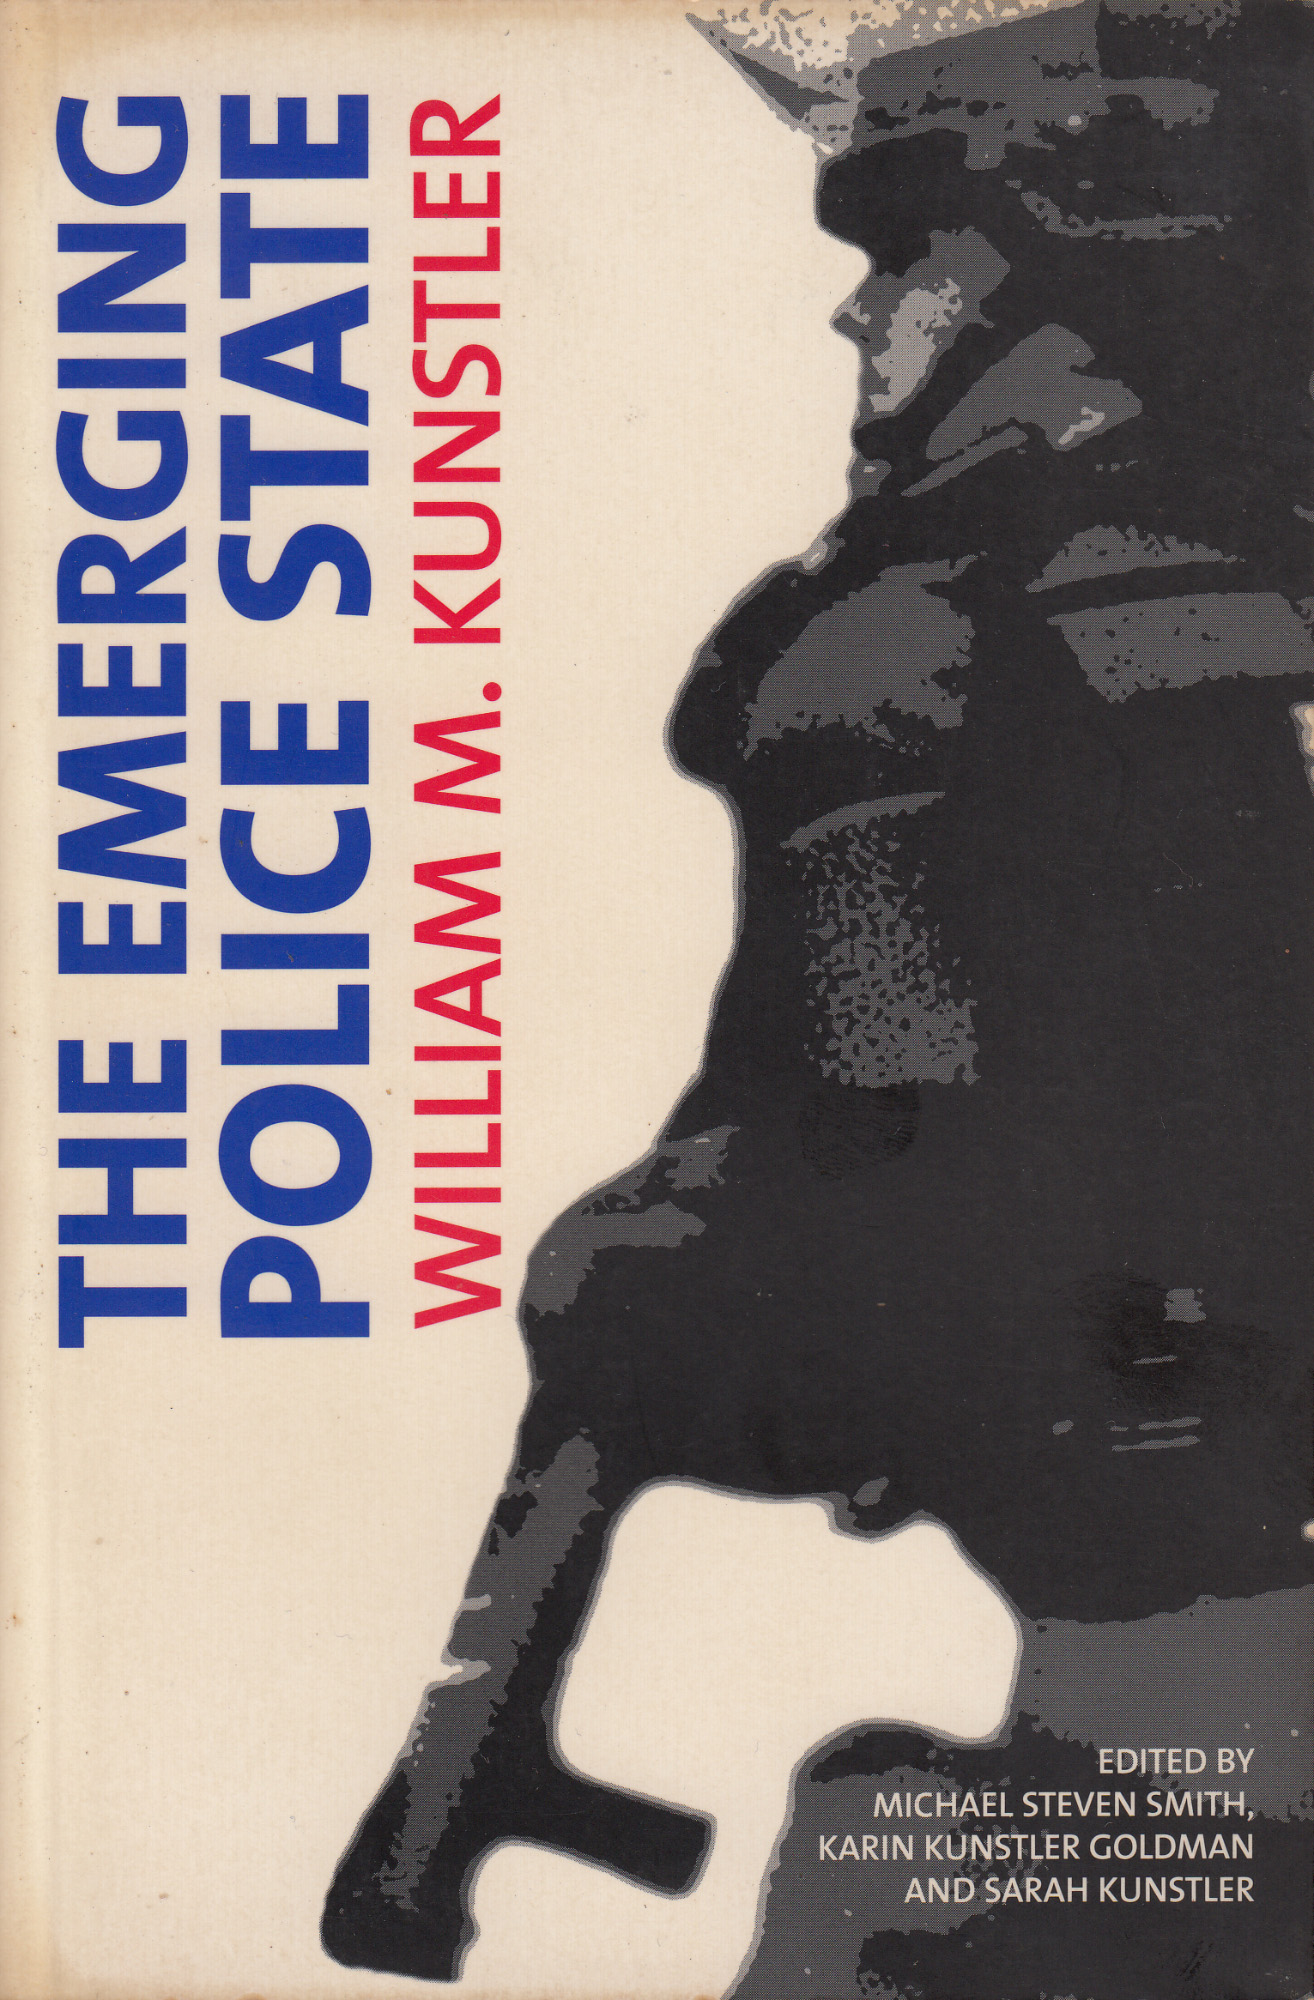 THE EMERGING POLICE STATE